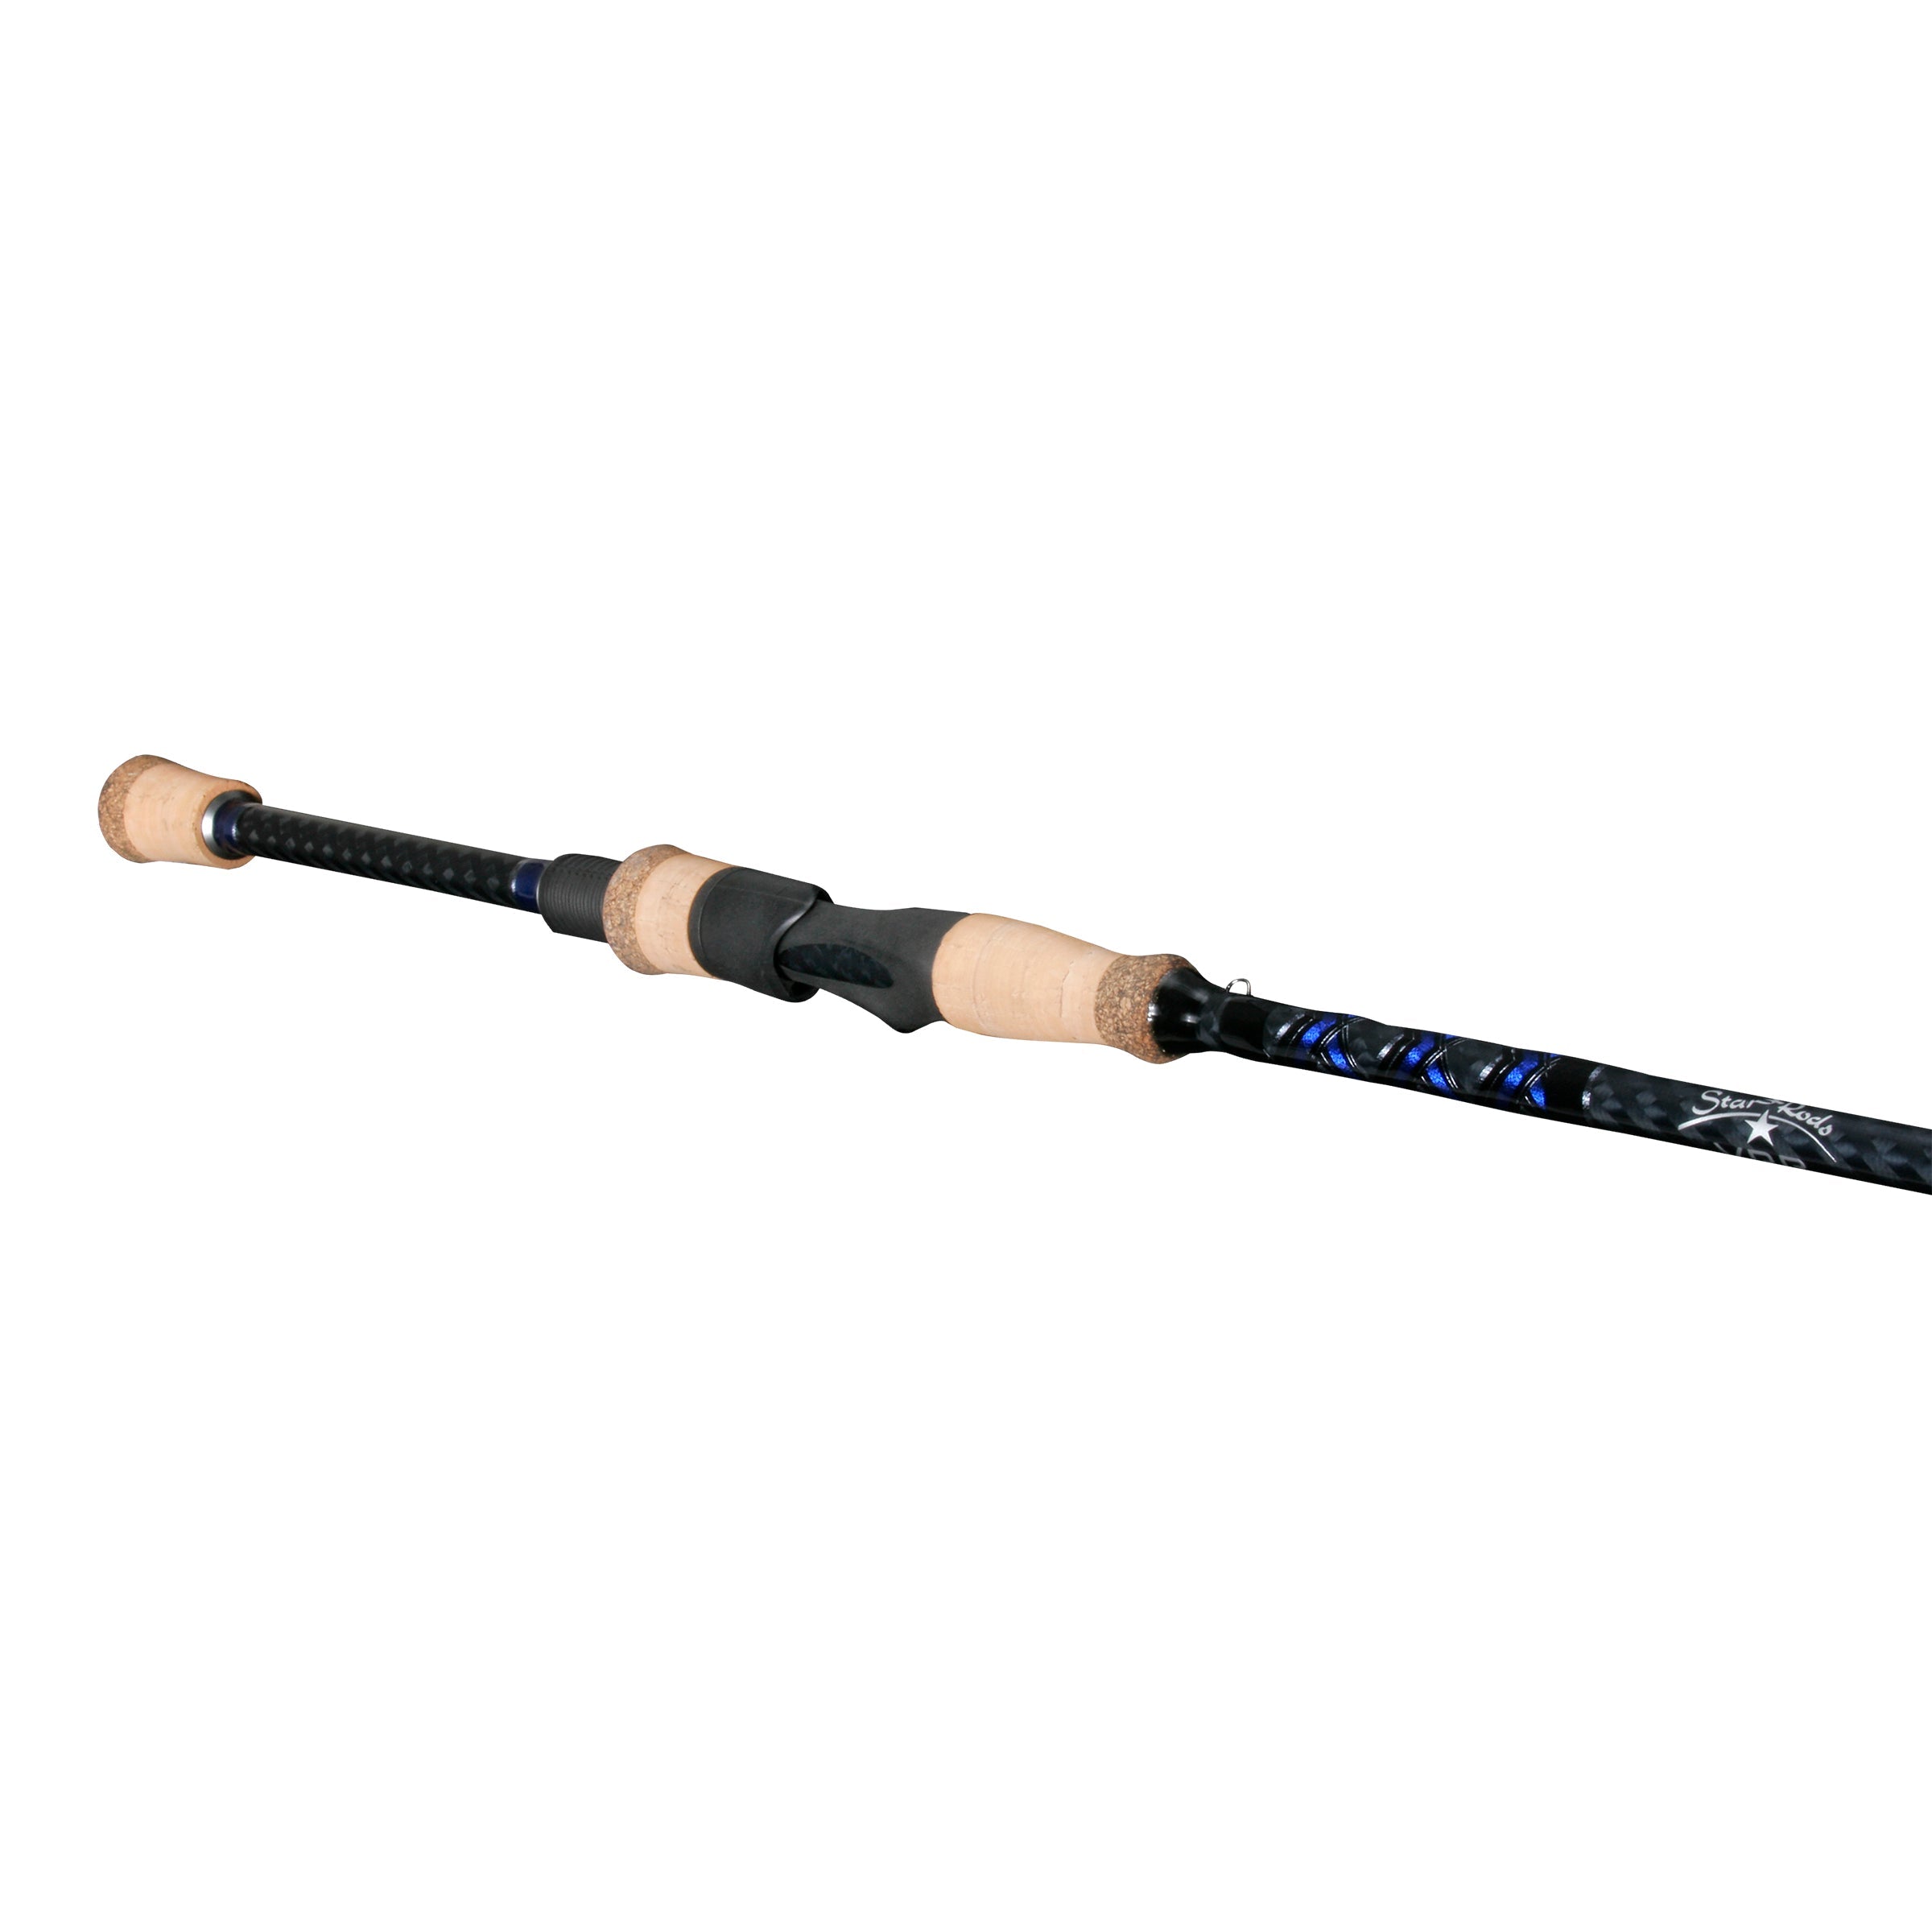 Star Rods Seagis 7' M Spinning Rod SK817FT70G – Capt. Harry's Fishing Supply